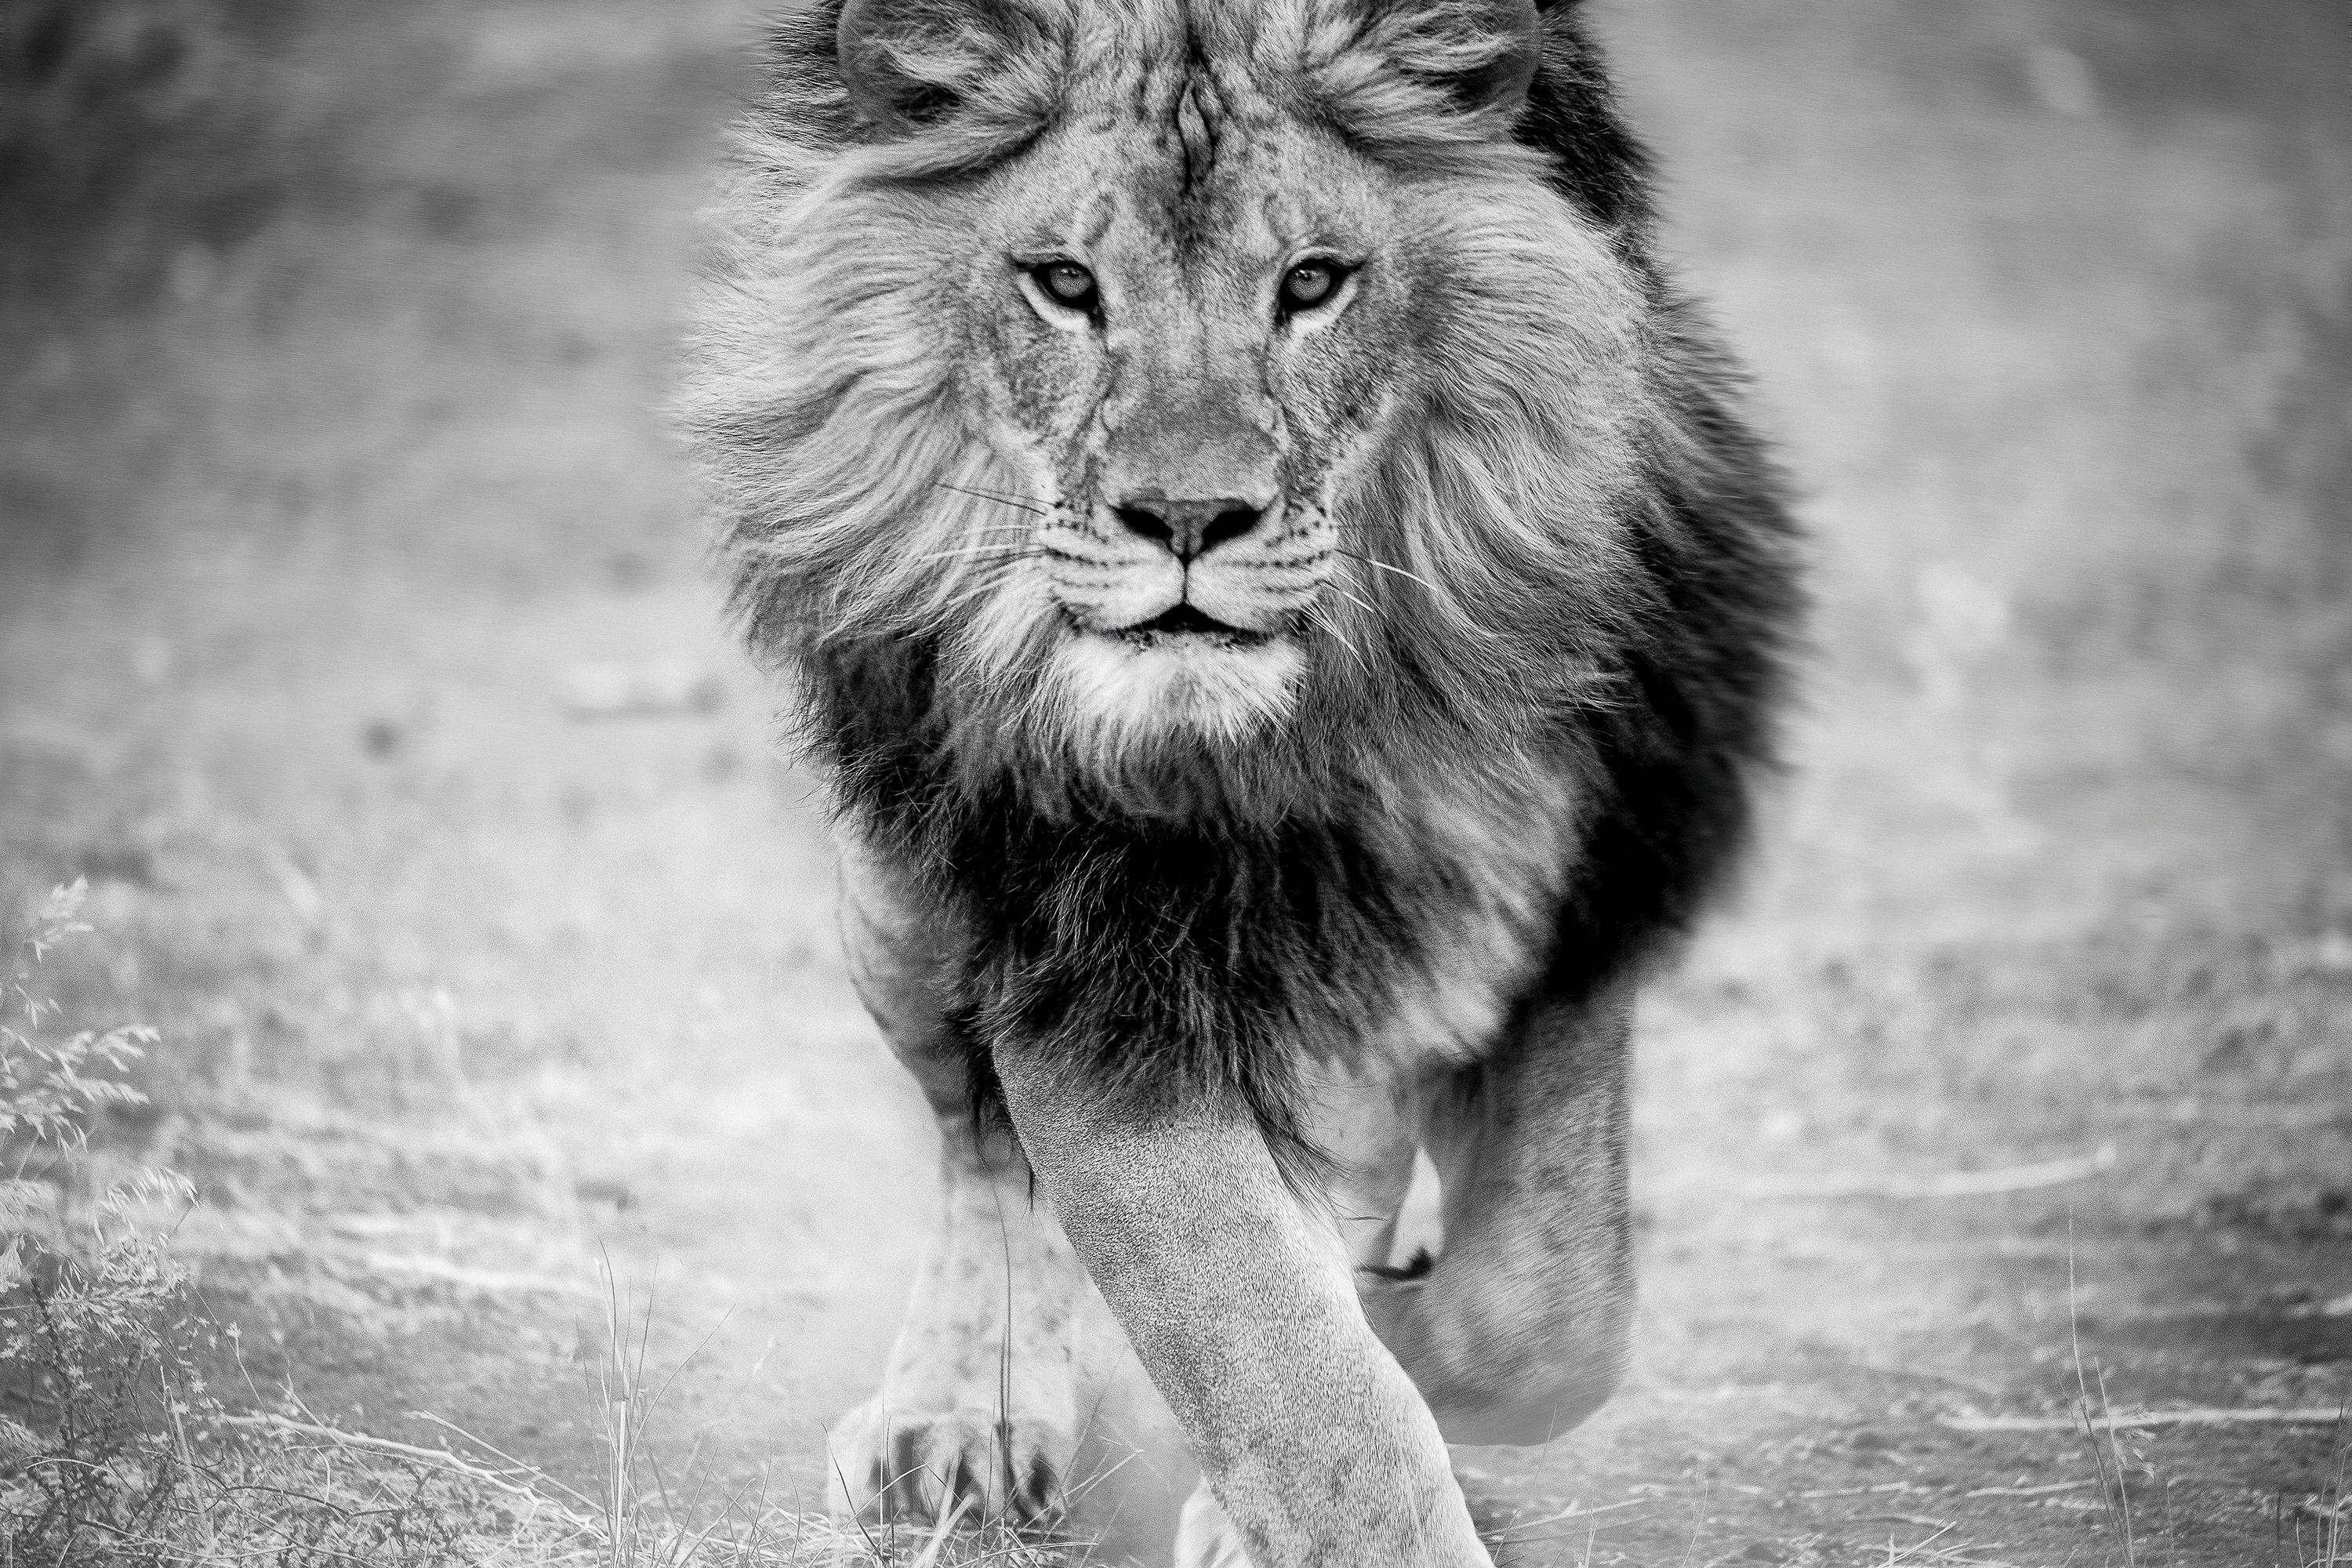 Shane Russeck Black and White Photograph - "Panthera Leo" 20x30 - Black & White Photography, Lion Photograph